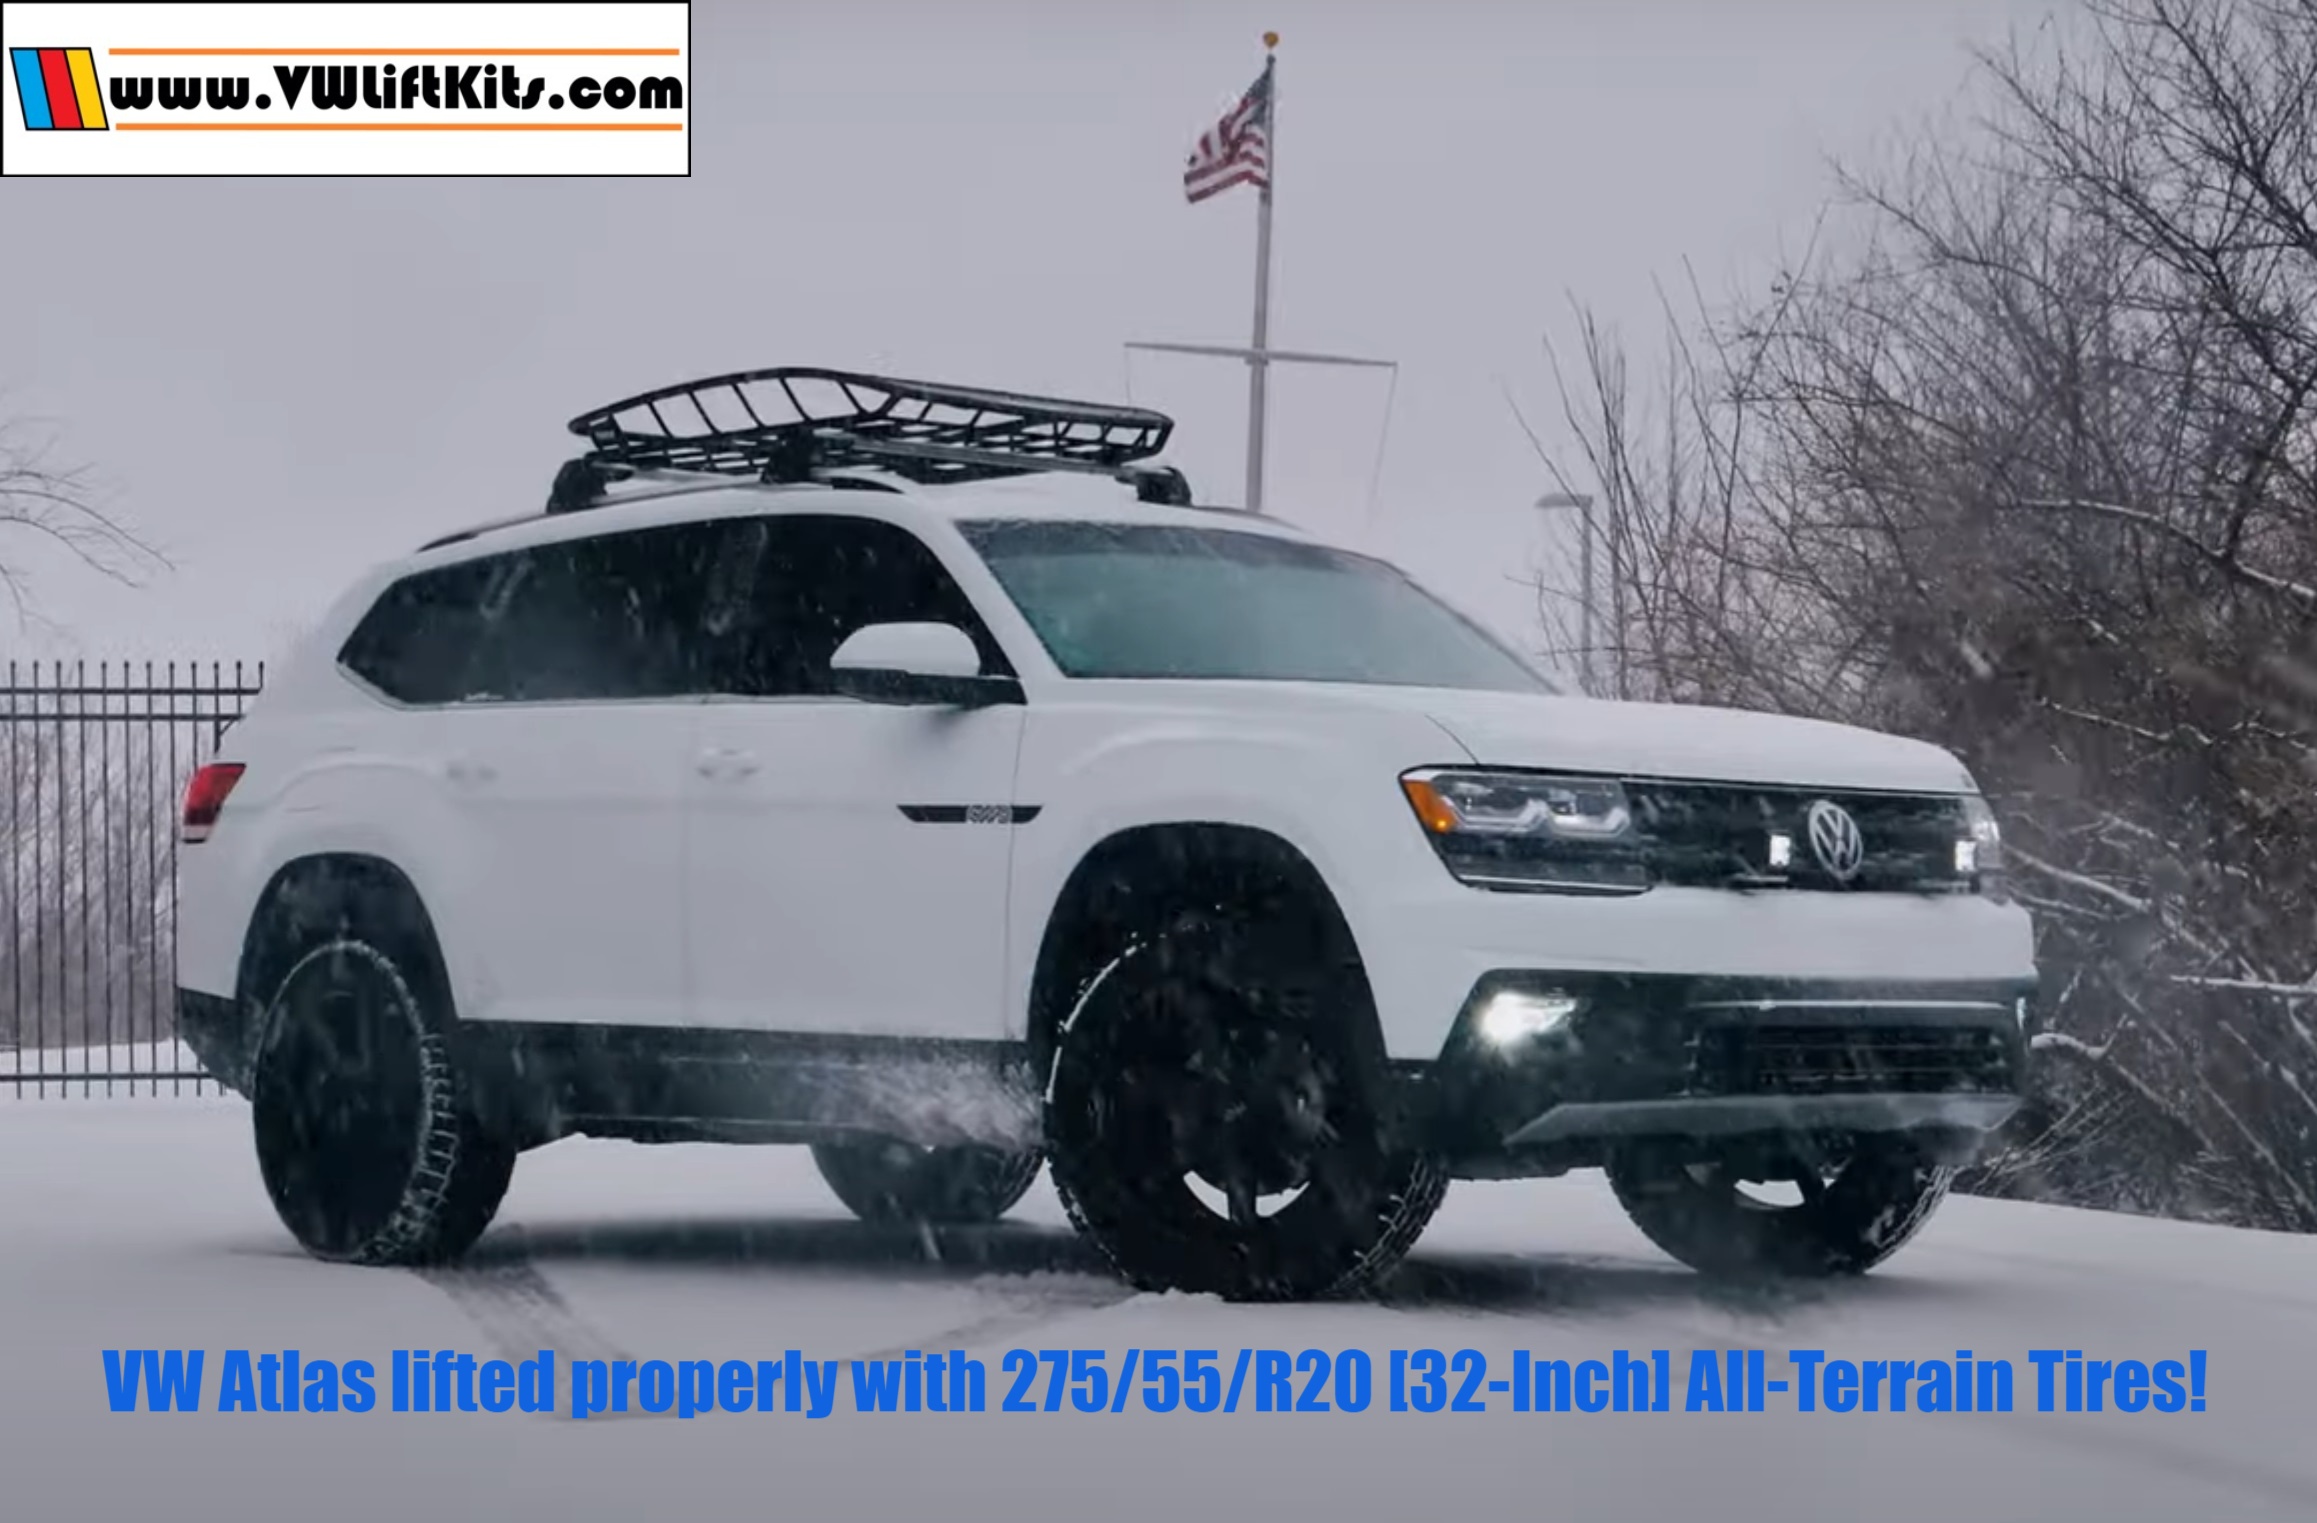 2019 VW Atlas lifted properly with the new 1.5-inch spacer kit for 32-inch tires!